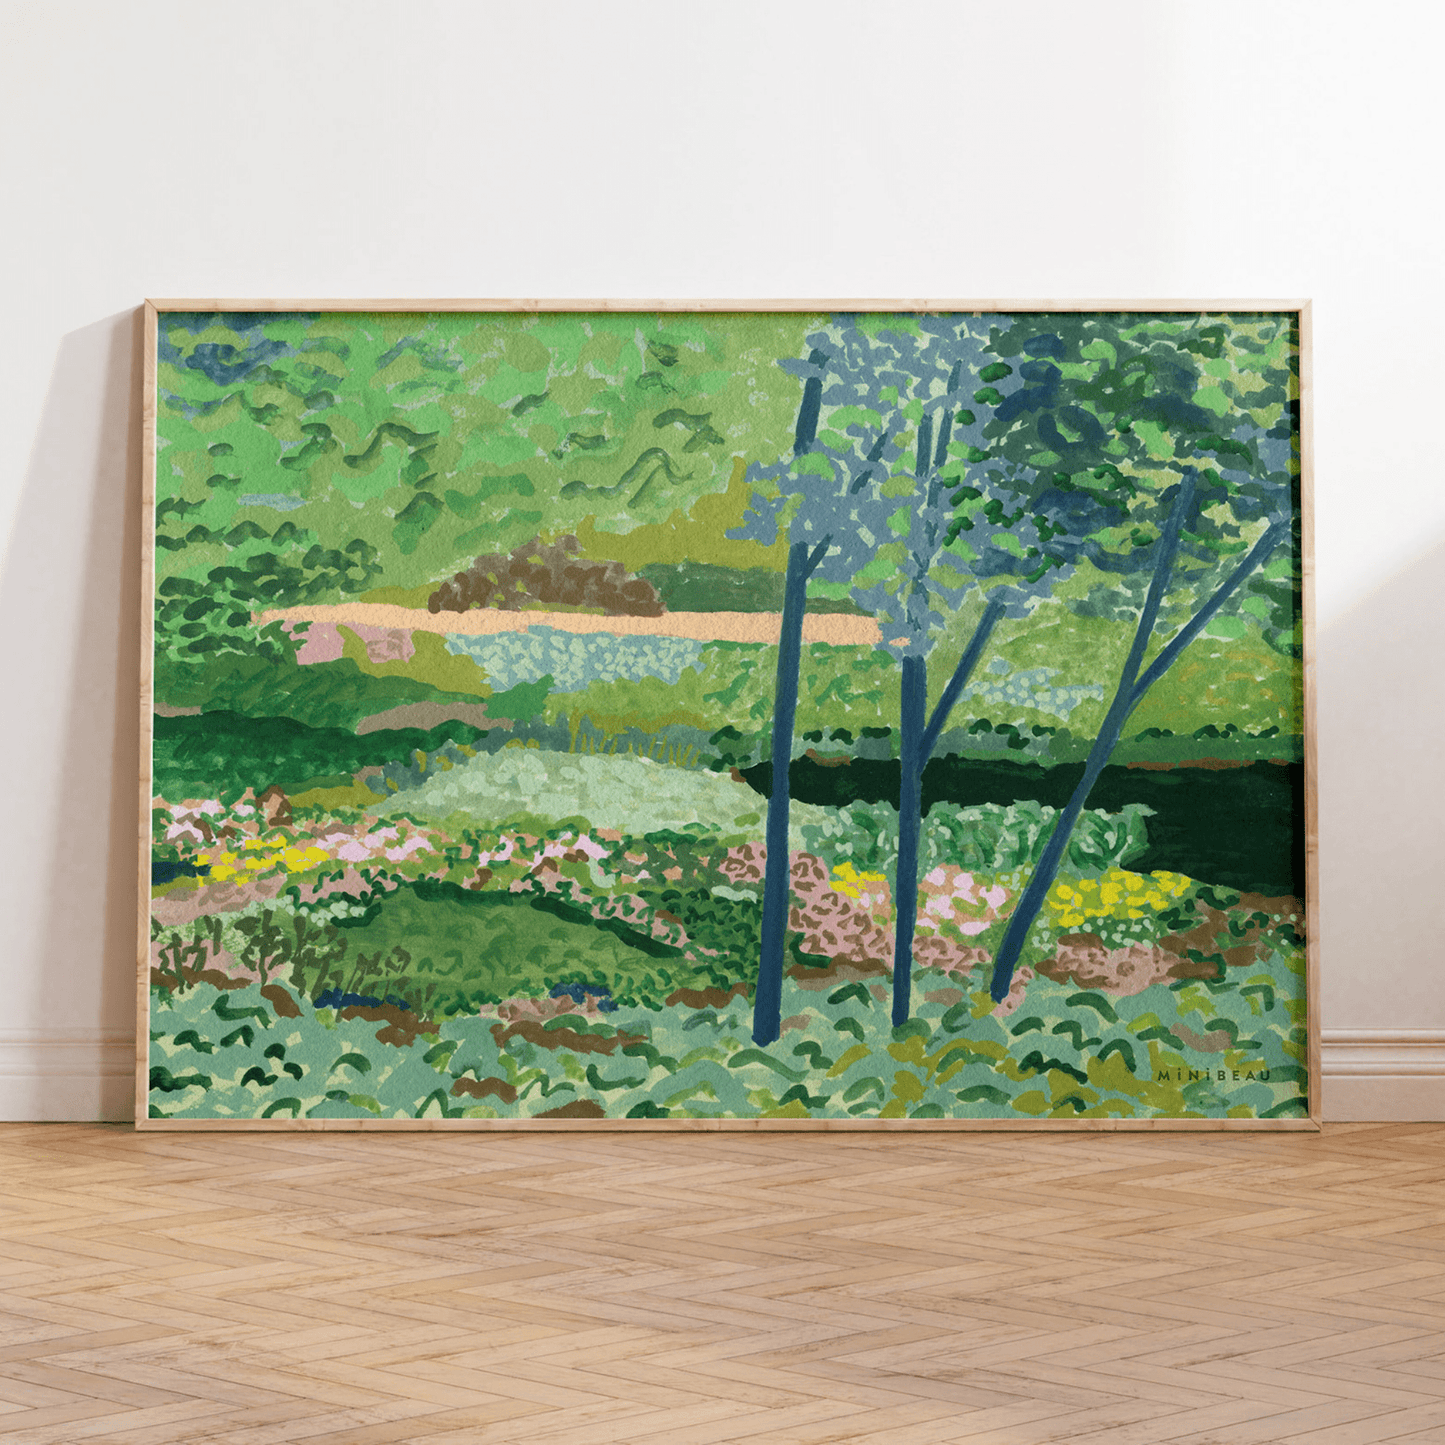 Art print in a light wood frame leaning on a white wall, standing on a parquet floor. Our Garden art print shows a beautiful painted country scene, a winding green path through floral meadows and woodland with a lake to the side, The print is green with tones of pink and yellow to represent flowers.